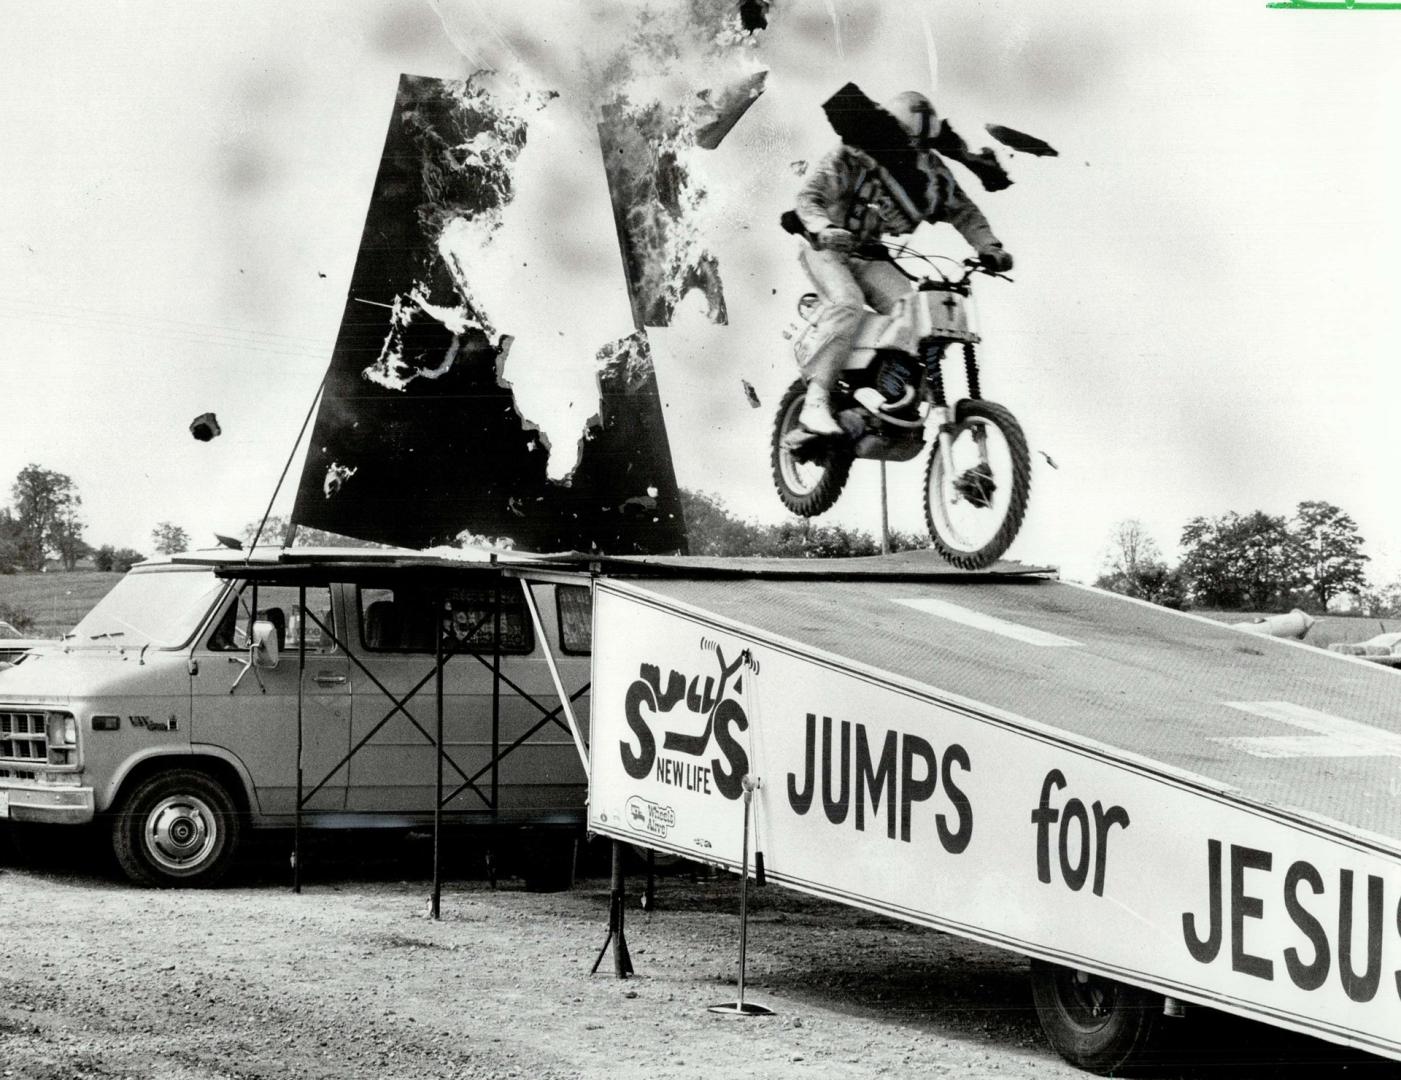 Trained by Evil Knievil, motorcyclist-jumper Gene Sullivan is now Jumping for Jesus